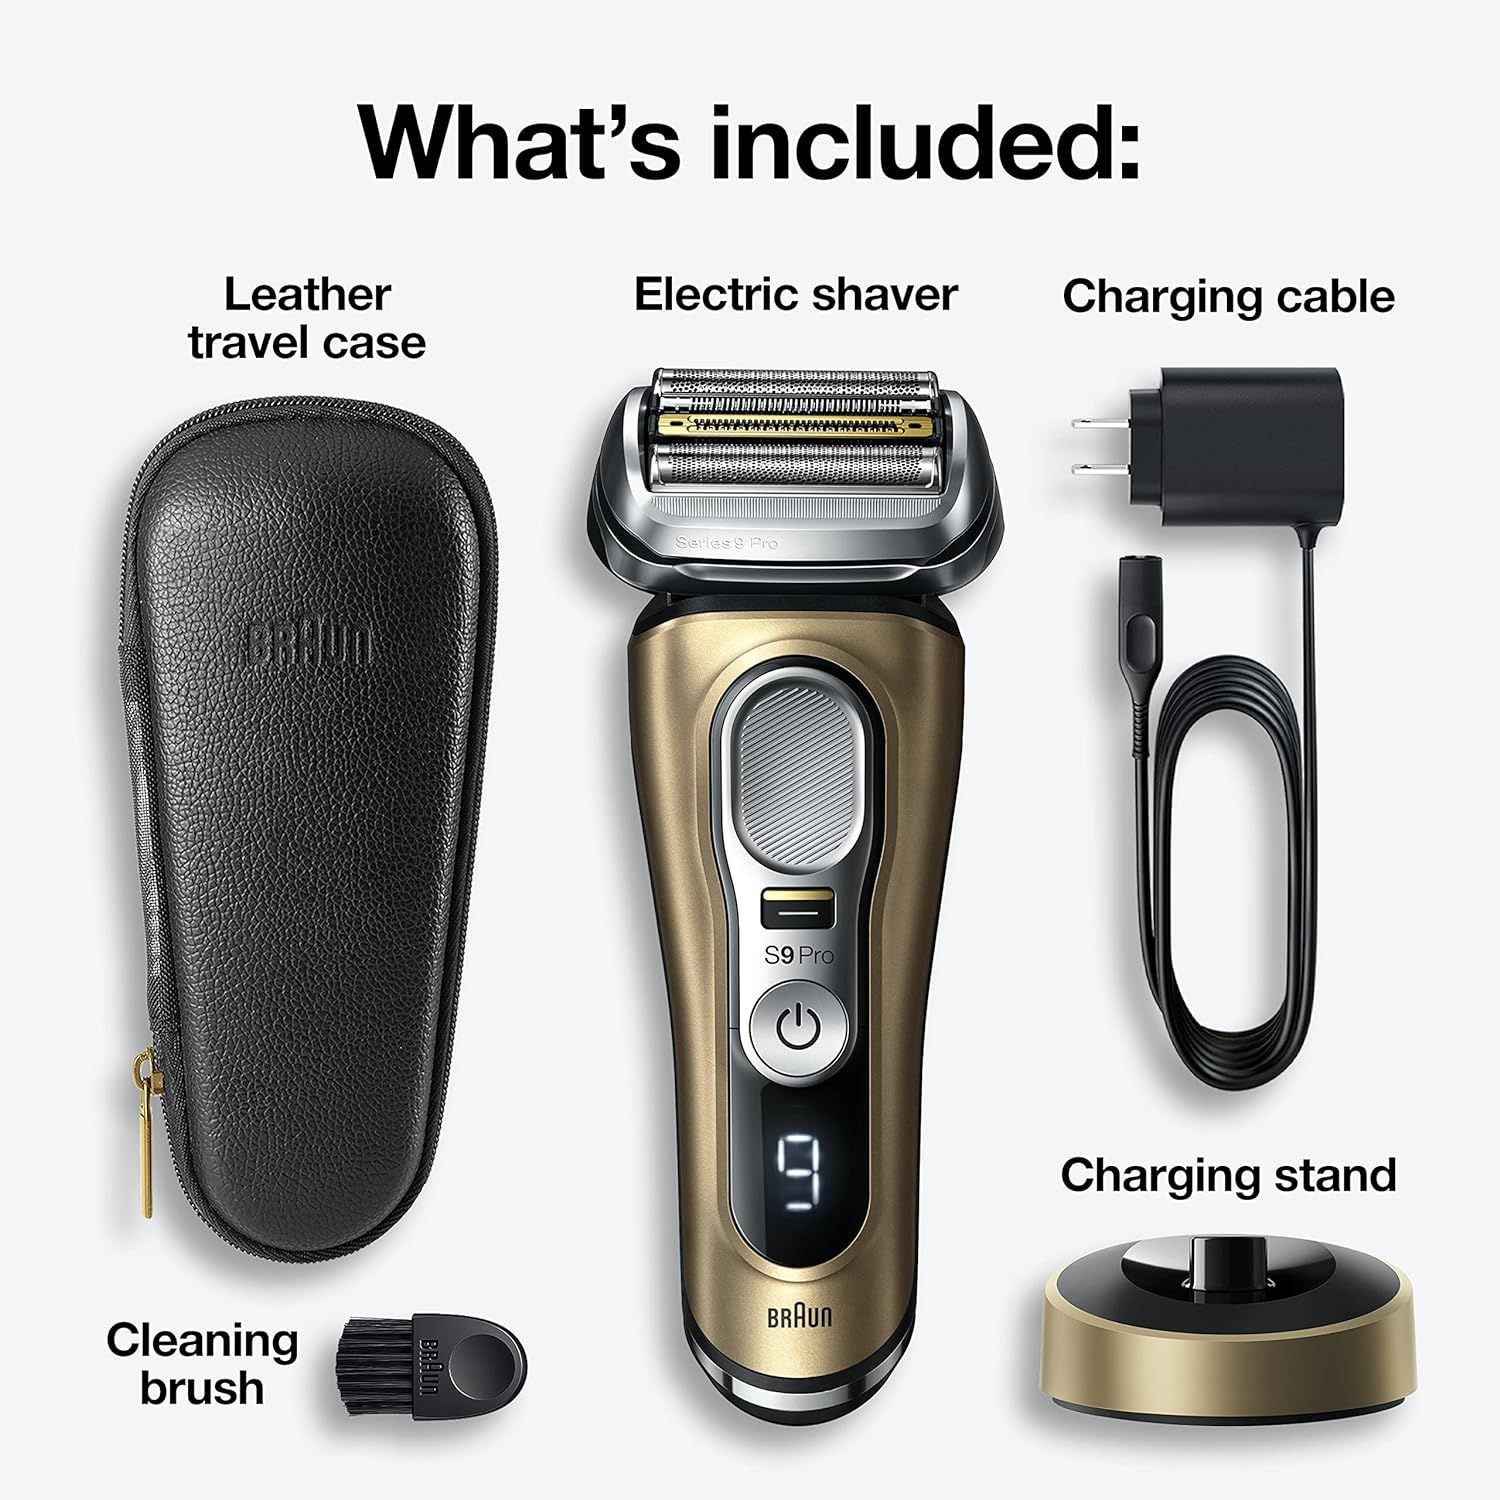  Braun Electric Razor for Men, Waterproof Foil Shaver, Series 5  5050cs, Wet & Dry Shave, With Beard Trimmer and Body Groomer, Rechargeable,  Charging Stand Included, Blue : Beauty & Personal Care